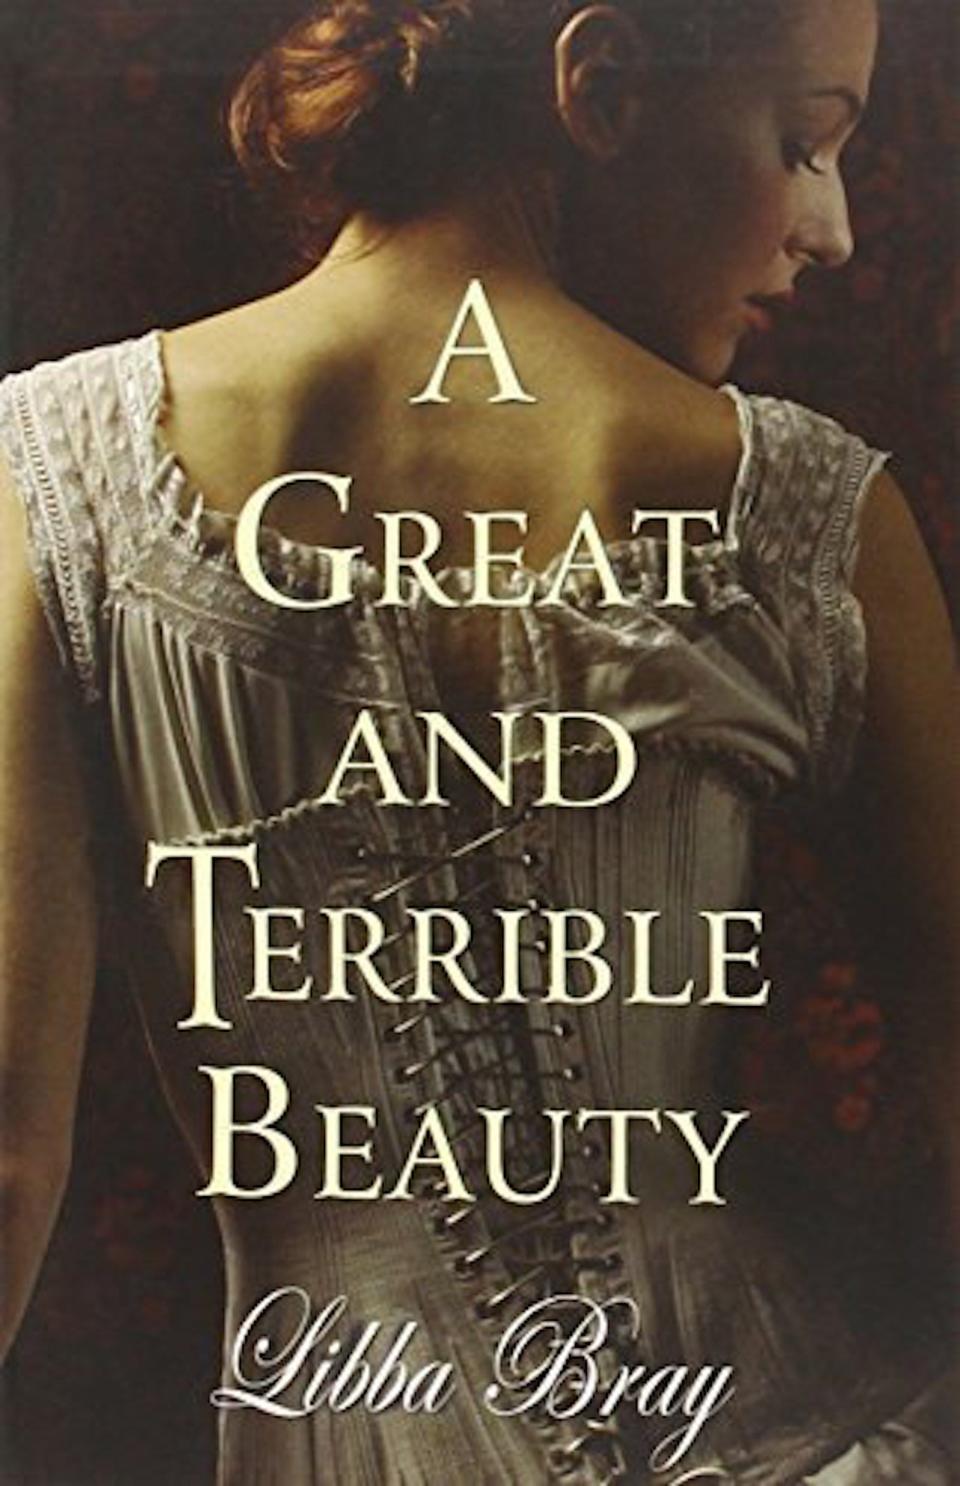 A woman in a white corset with red hair looks over her shoulder with "A Great And Terrible Beauty" written over it.